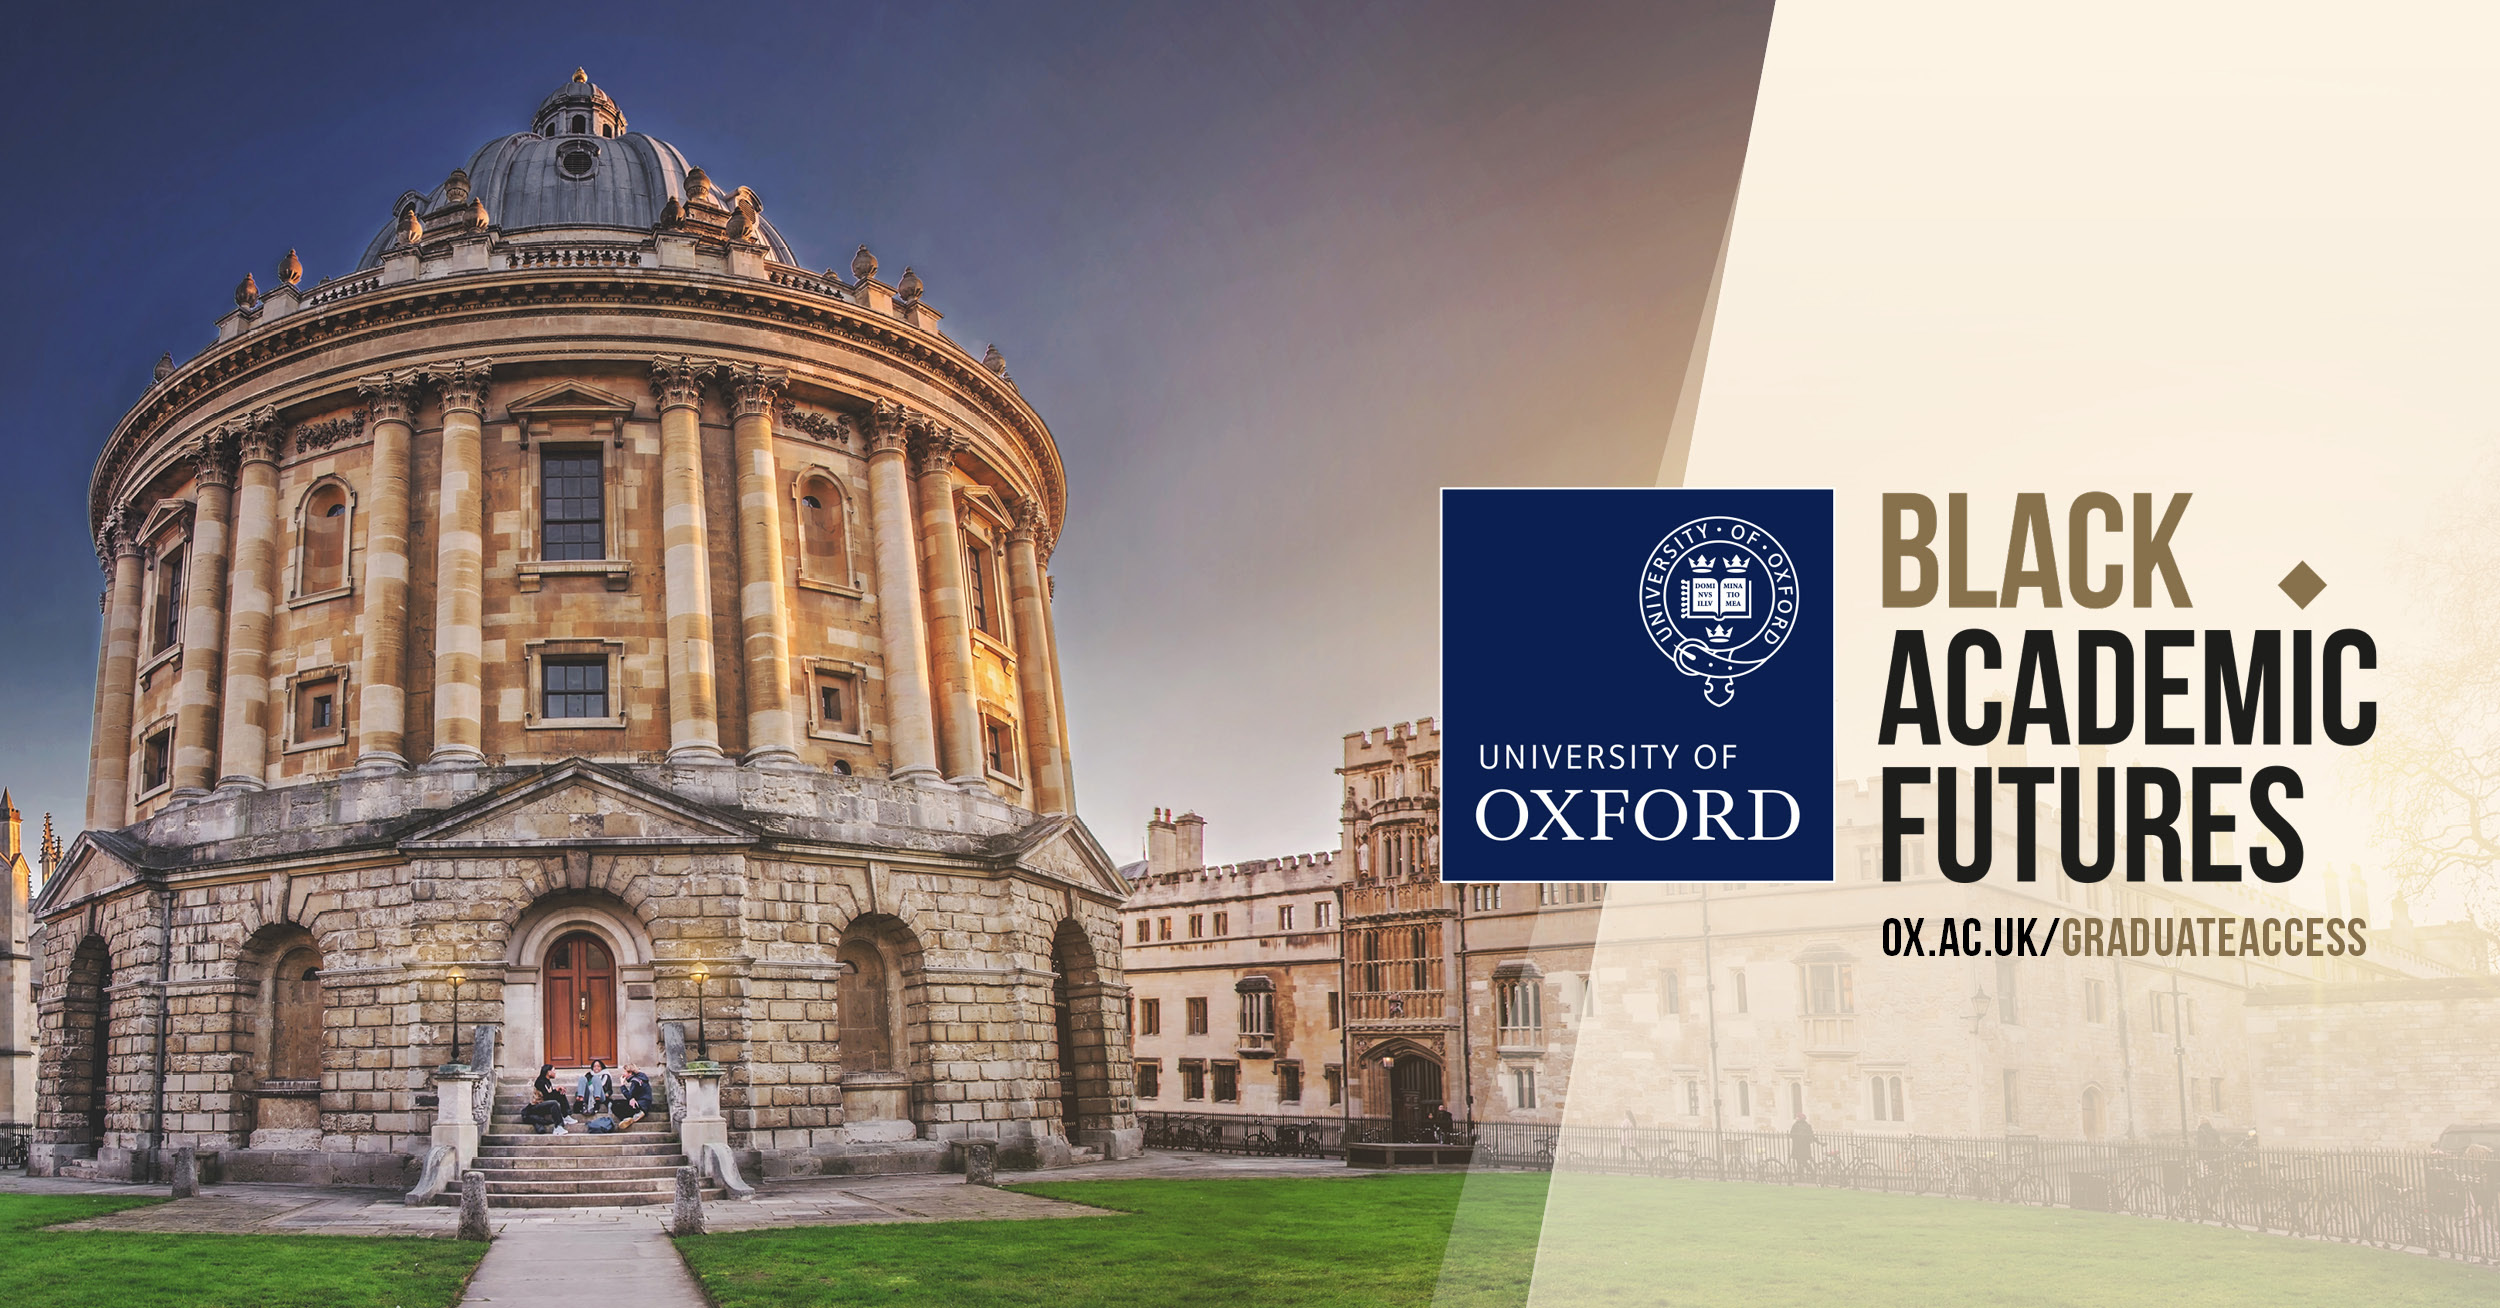 Radcliffe Camera with University of Oxford logo and 'Black Academic Futures' superimposed